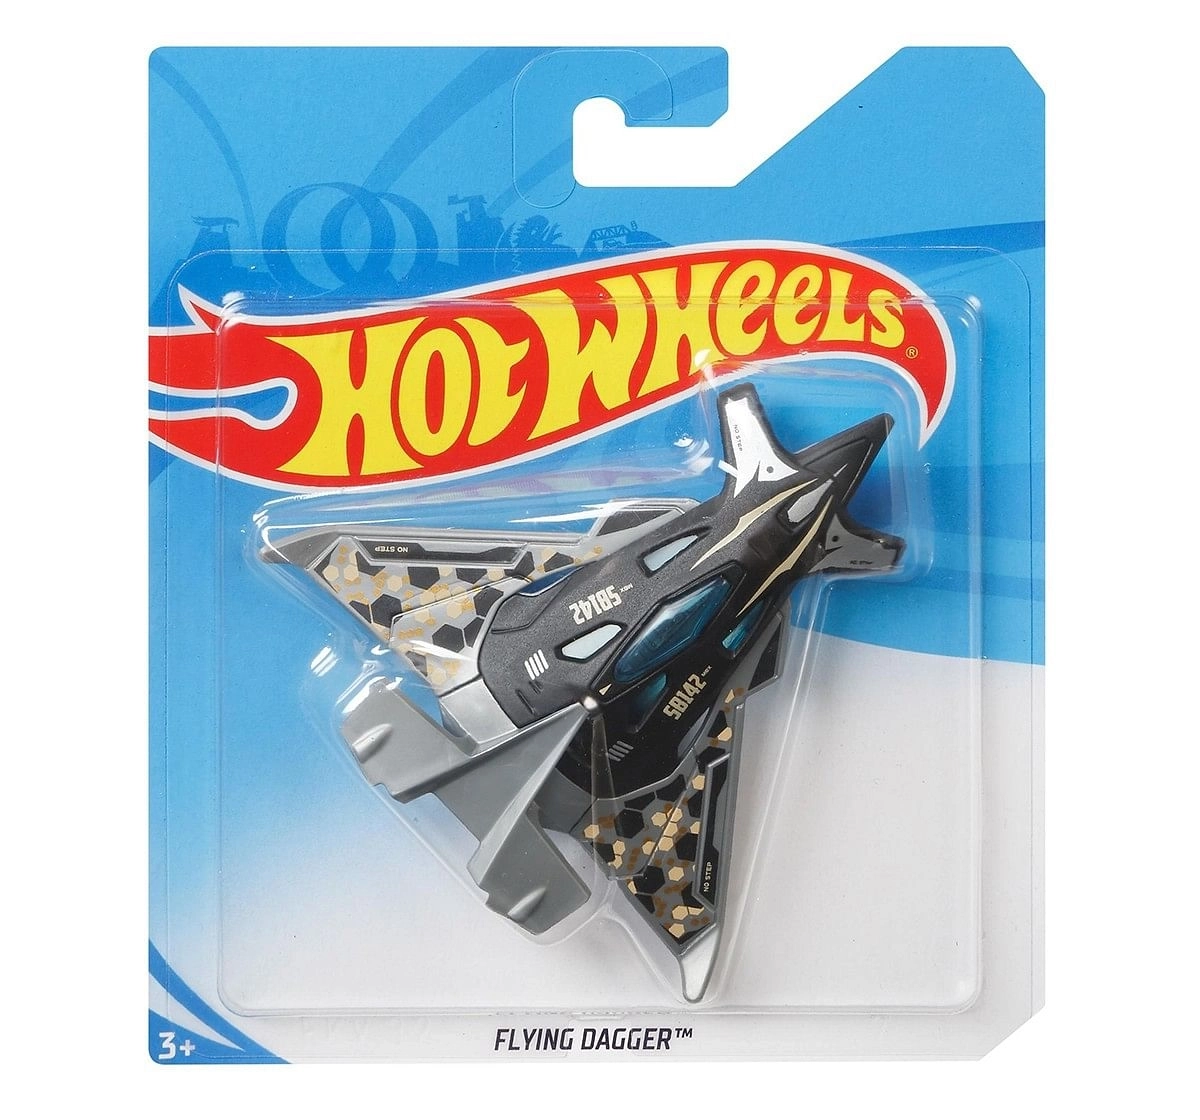 Hot Wheels Sky Buster Vehicles for Boys age 3Y+, Assorted